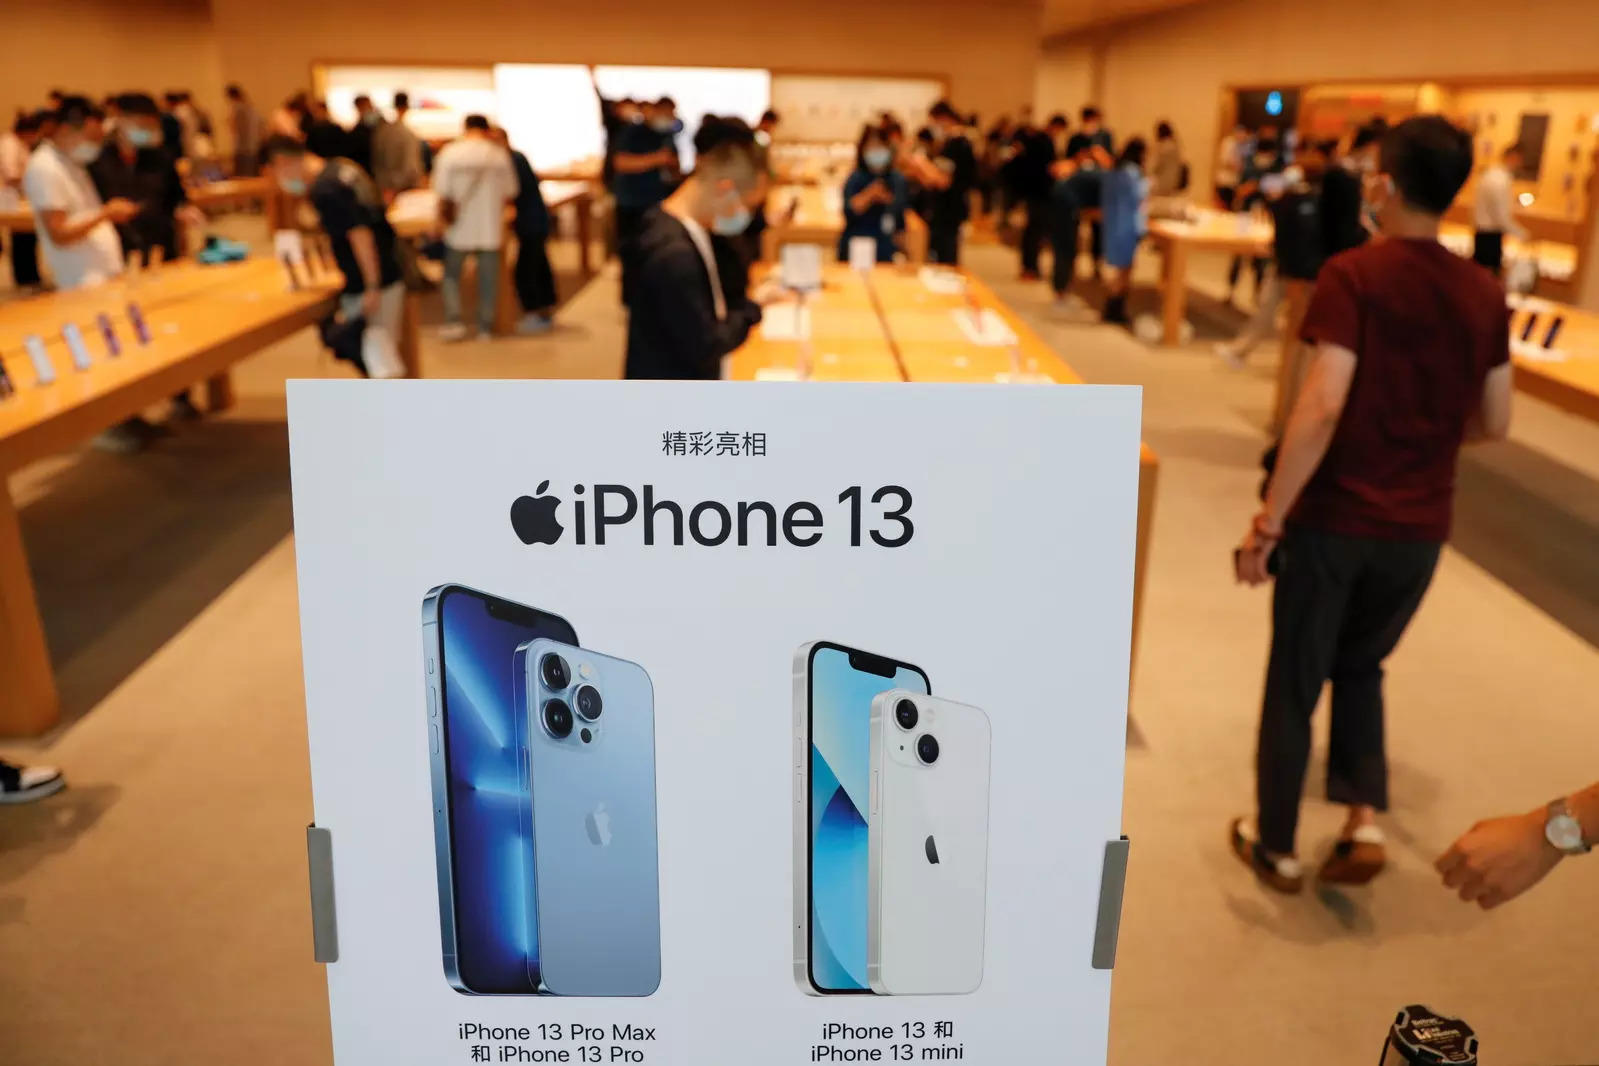 Apple to sell fewer iPhones as chip crisis bites, J.P. Morgan says